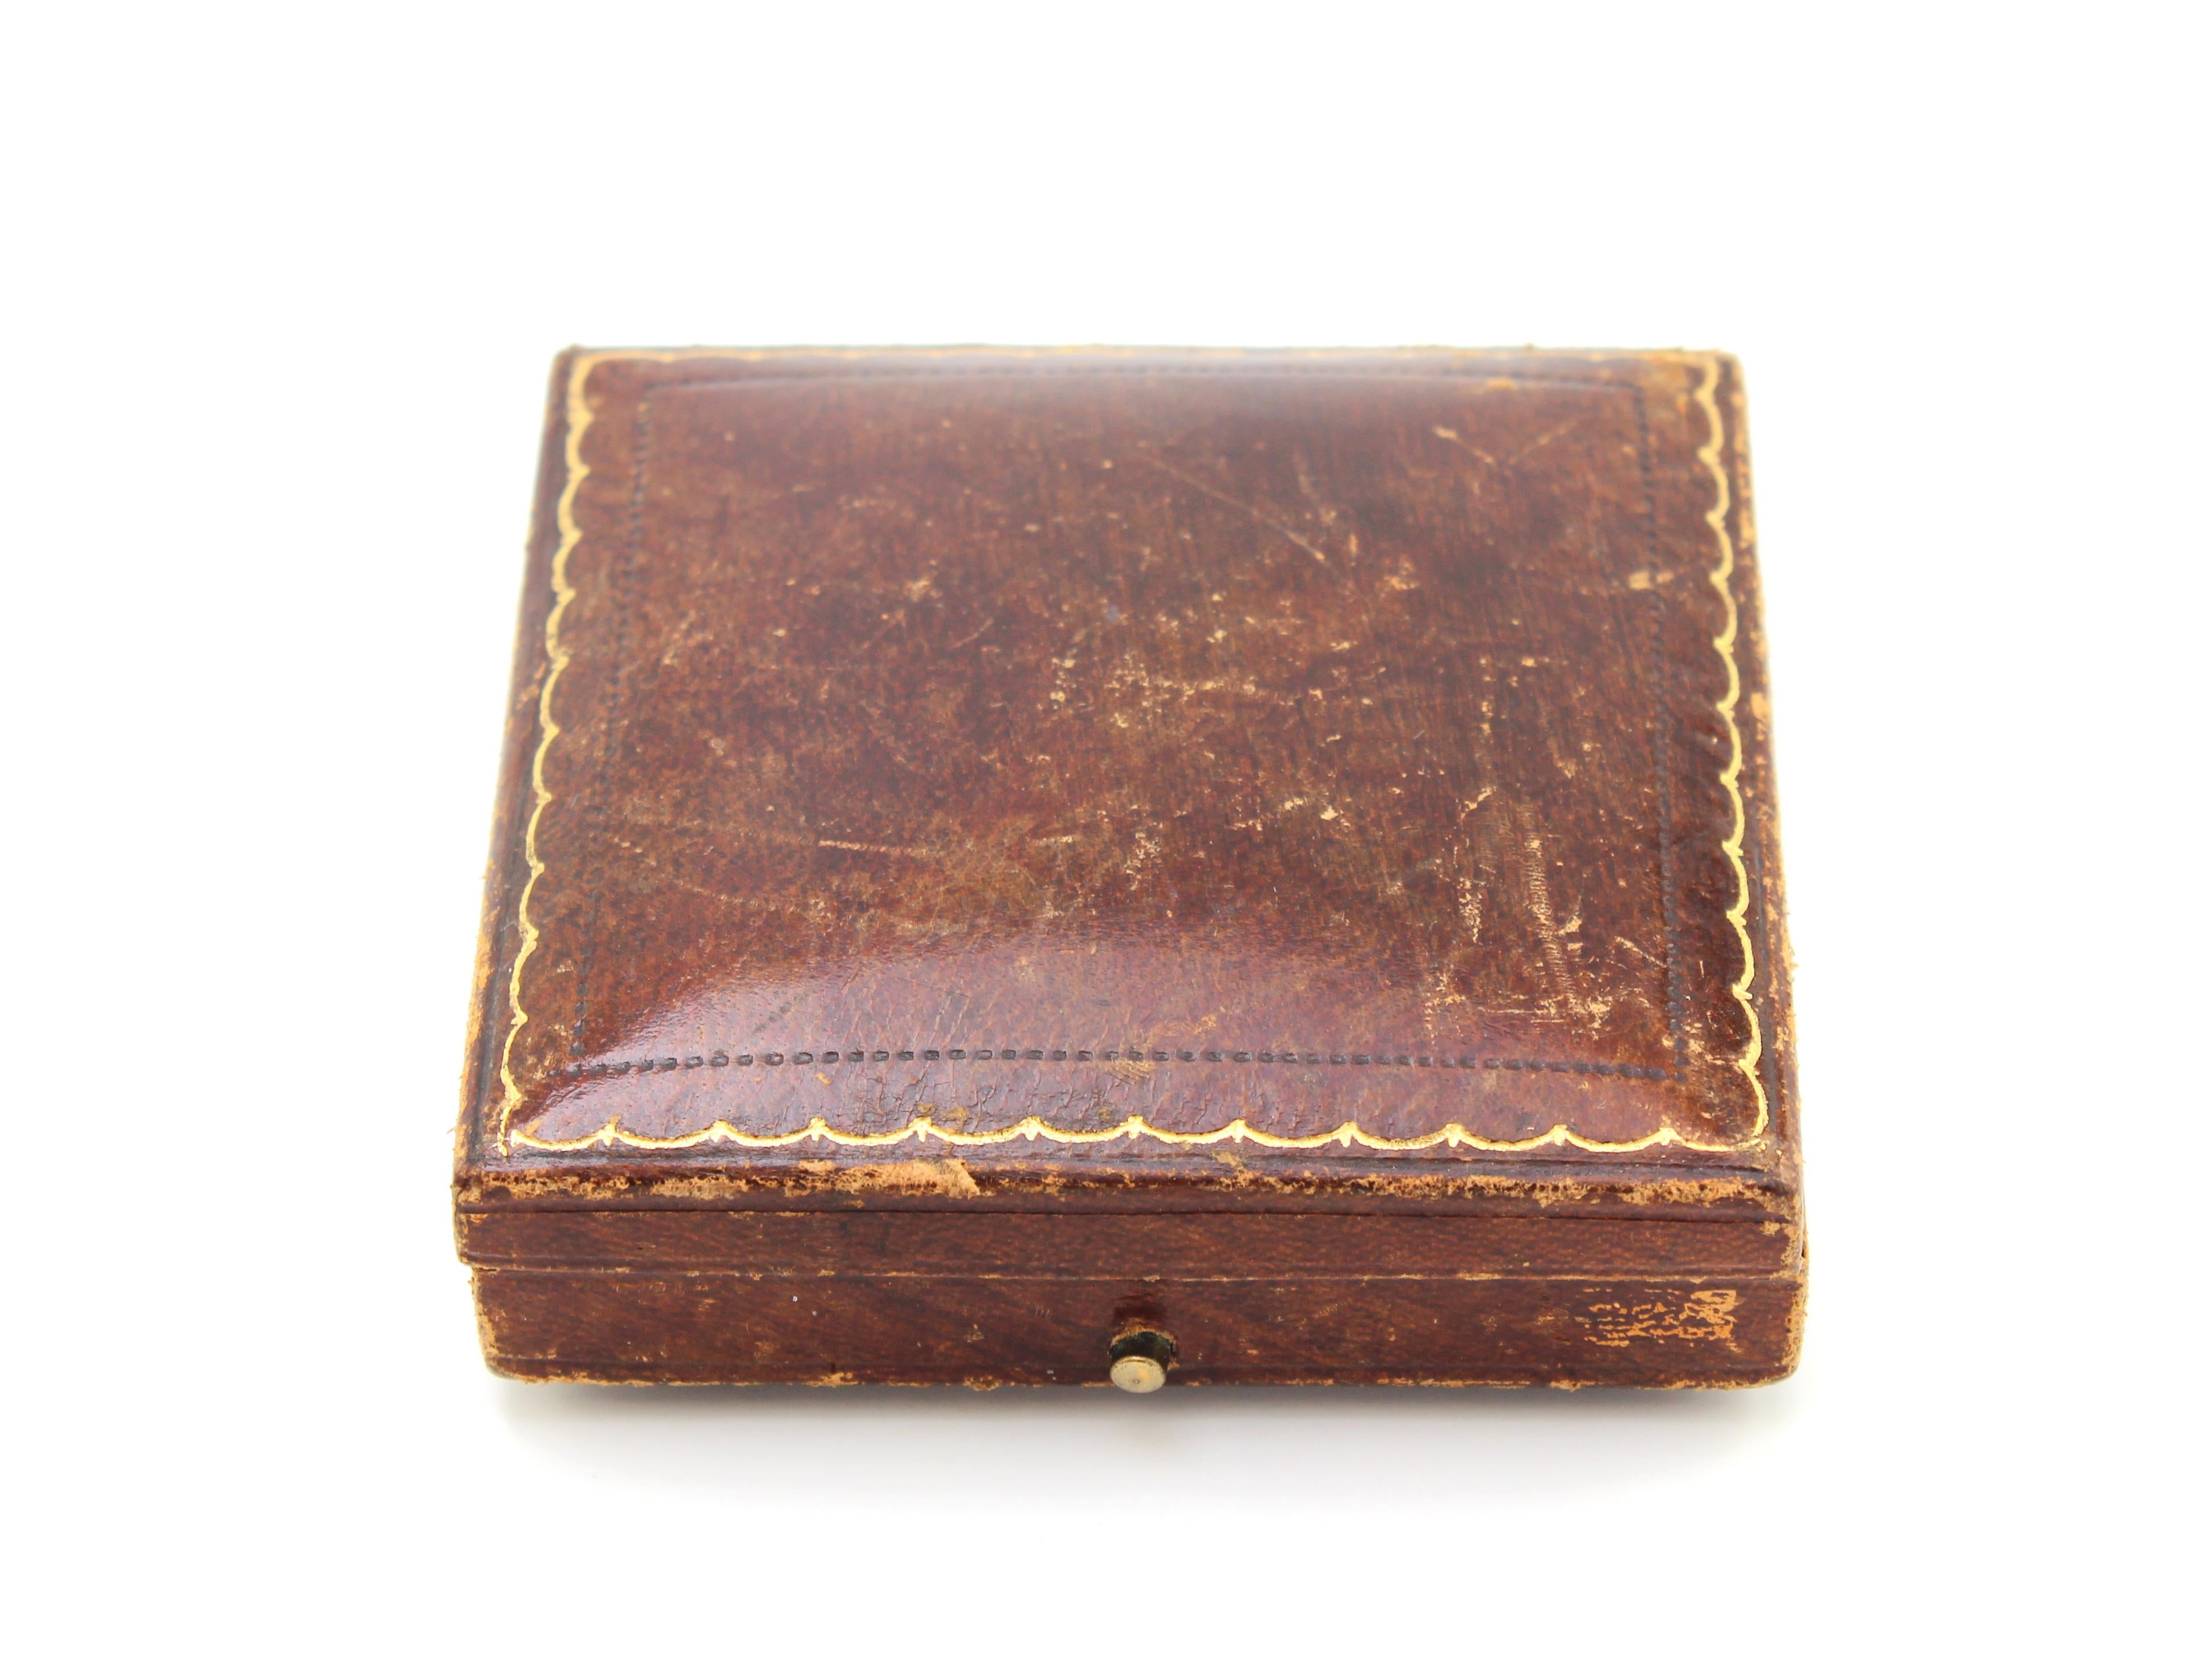 Antique 19th century Victorian leather, velvet jewellery box for brooches, 1890
Size: 8 x 8 x 2.2 cm.